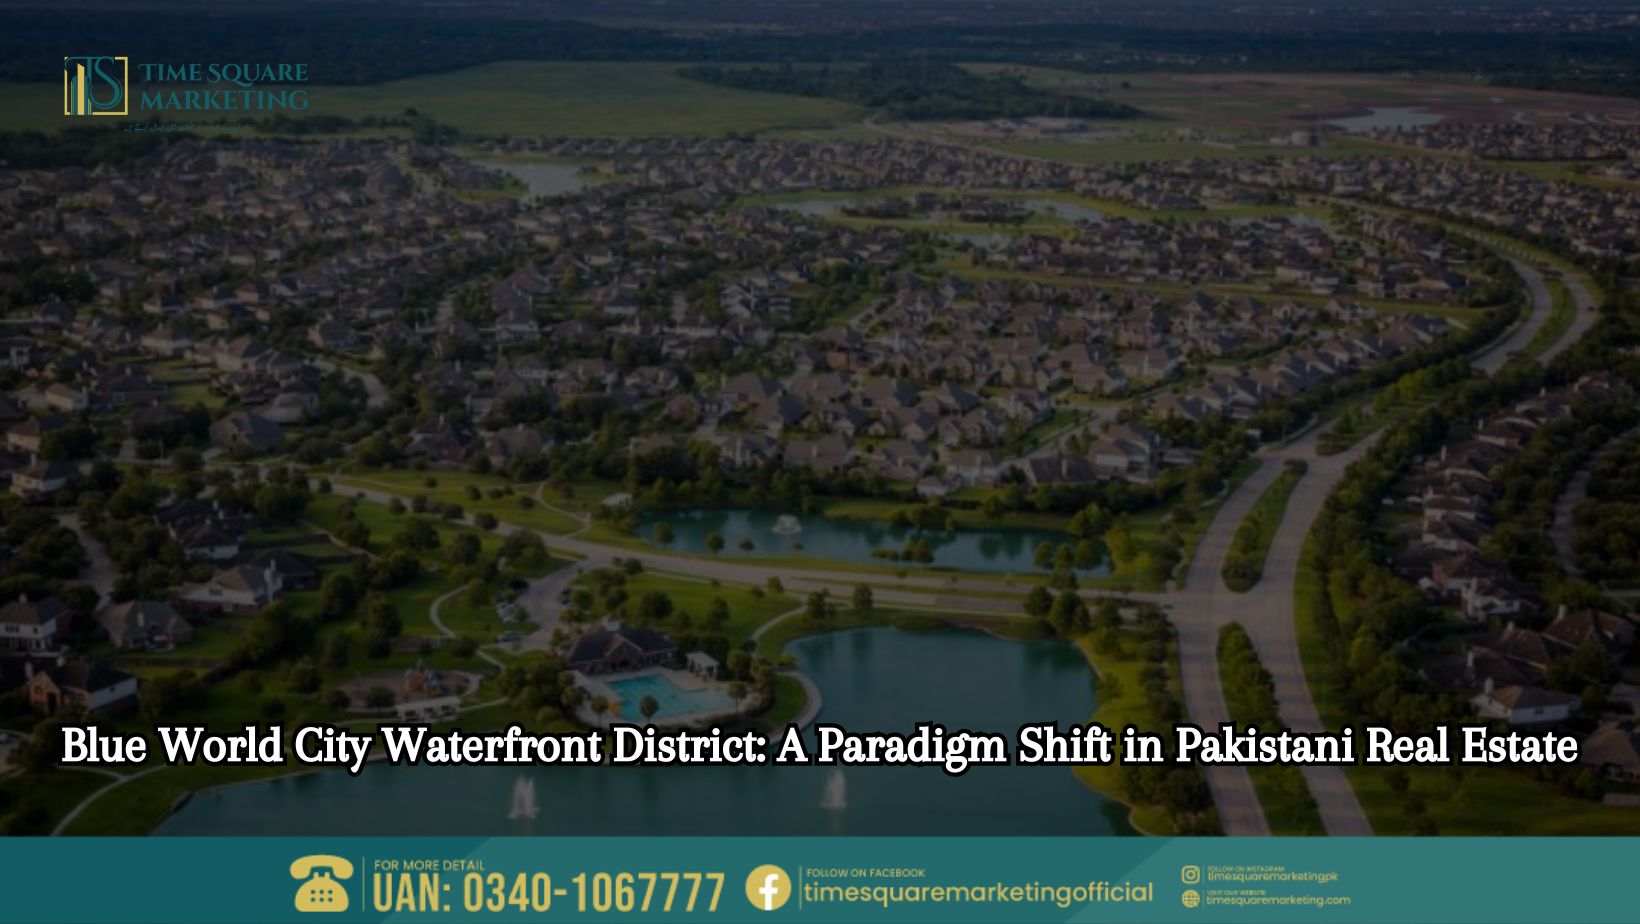 Blue World City Waterfront District A Paradigm Shift in Pakistani Real Estate